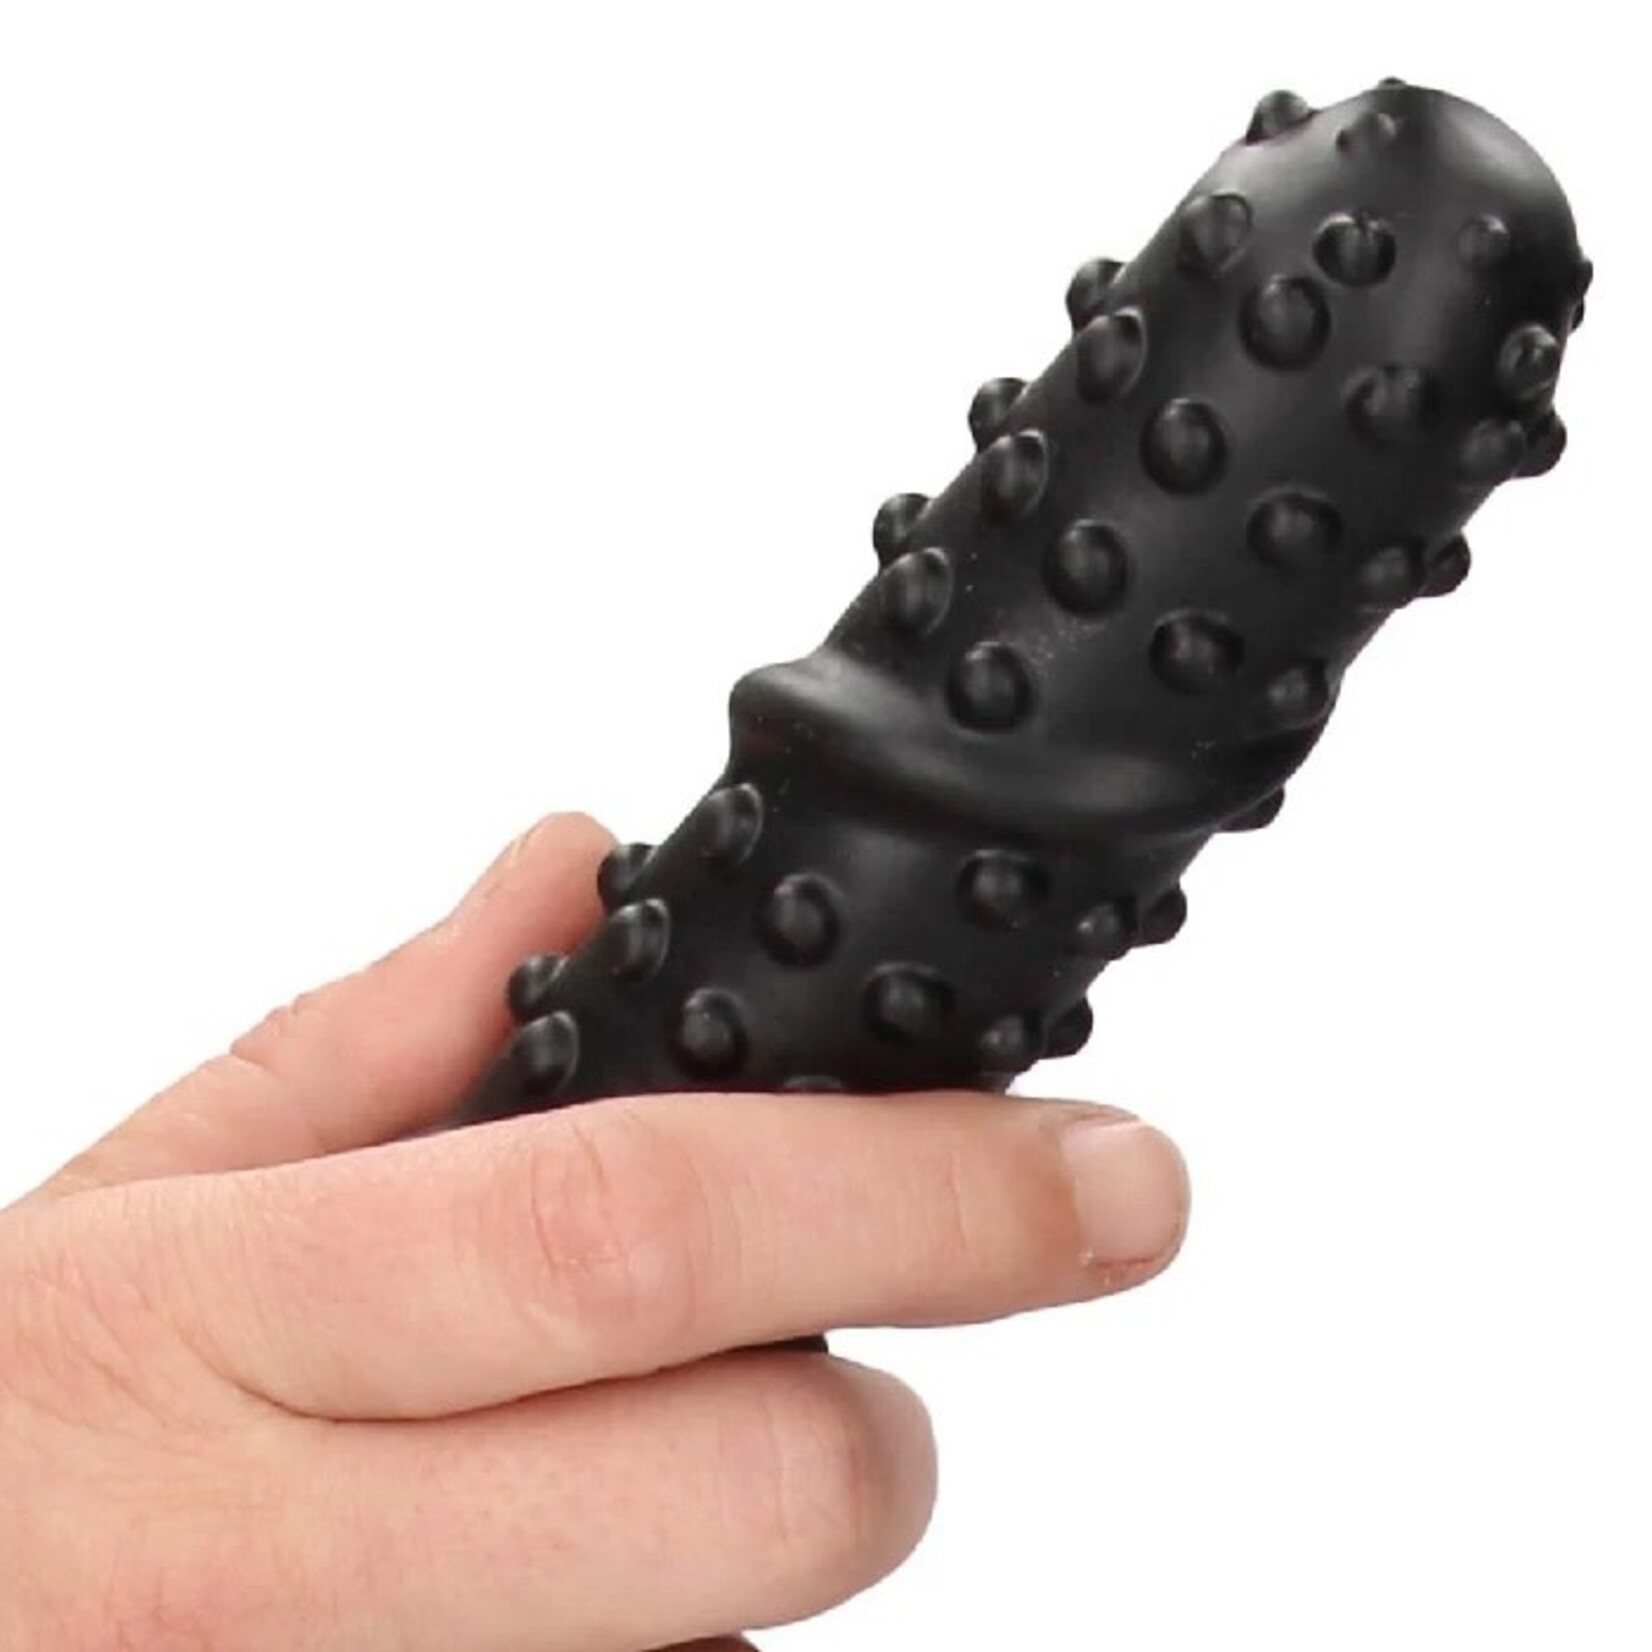 OUCH OUCH! TEXTURED ASS SNAKE 21 INCH DILDO